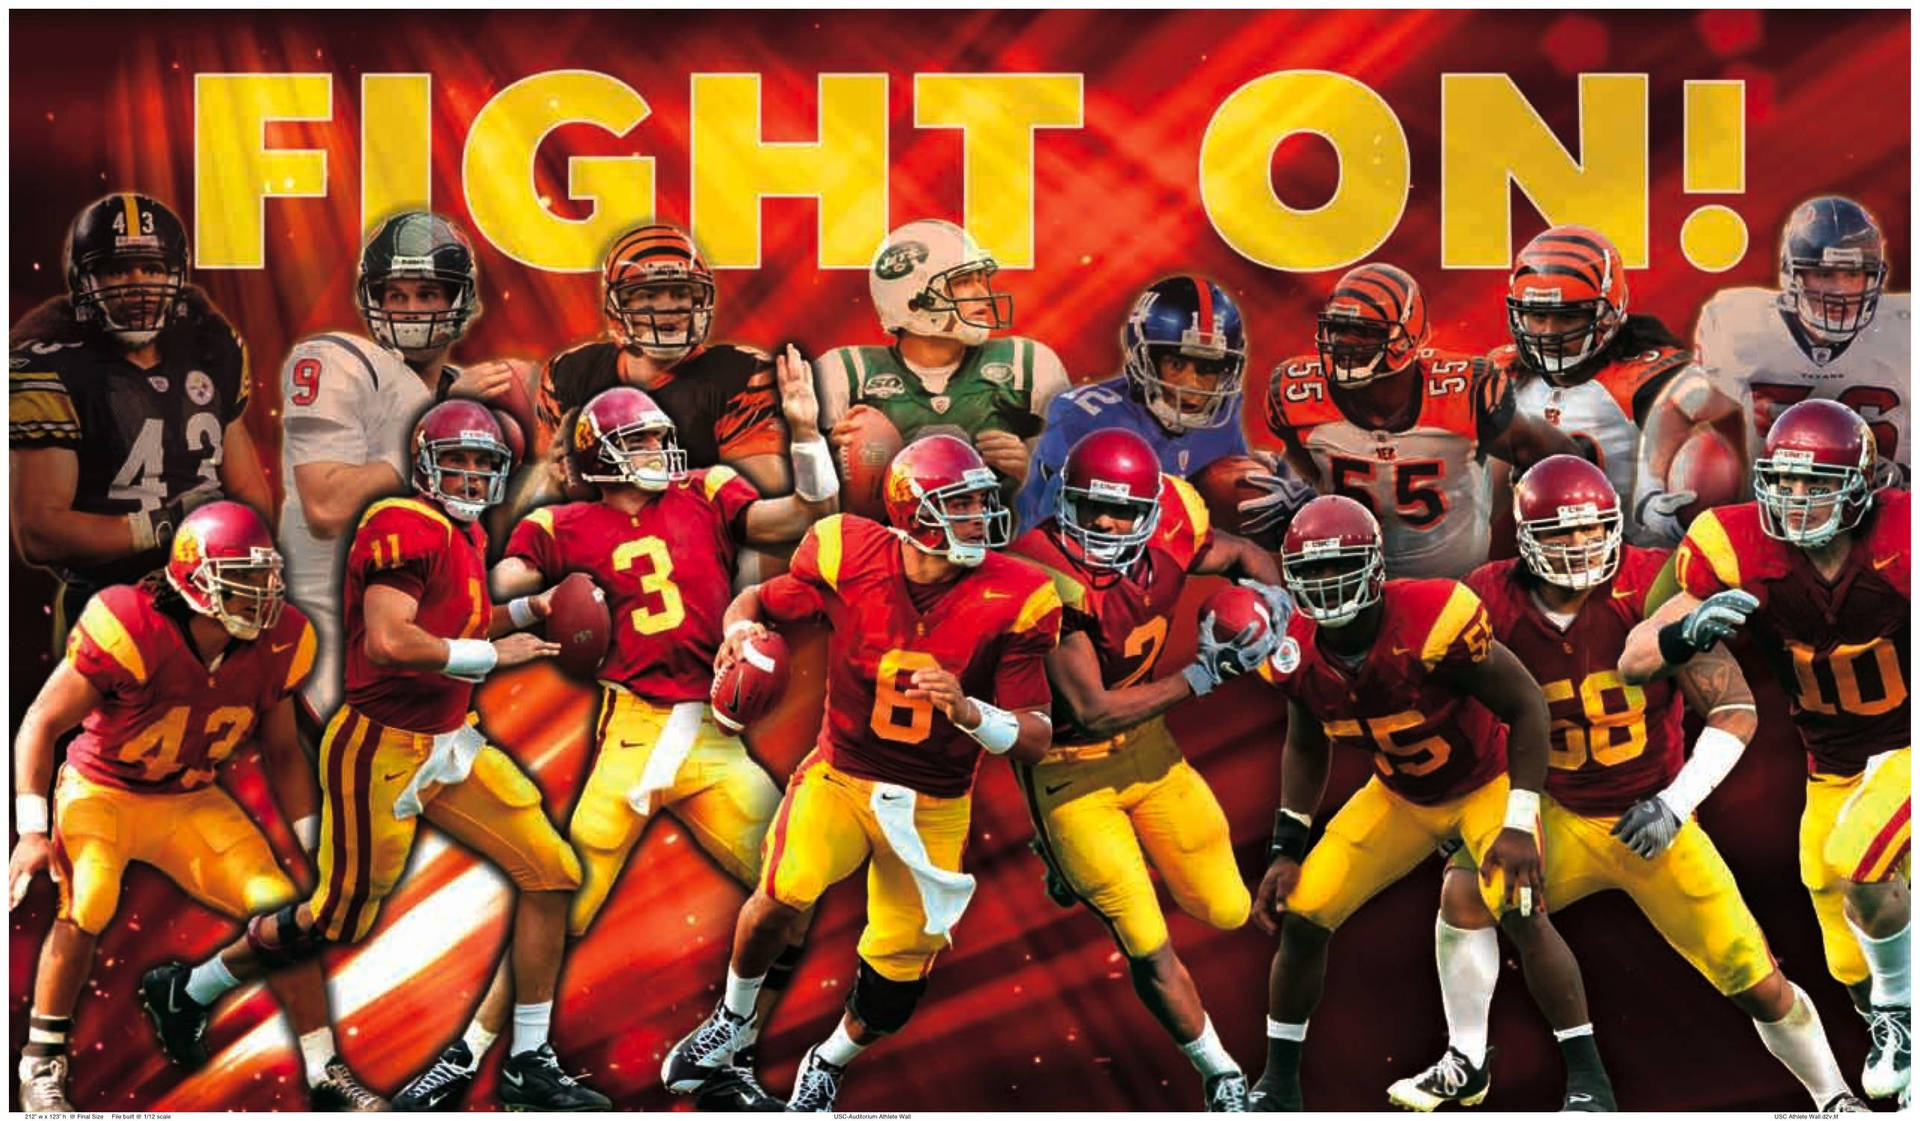 Usc Football Players Fight On Wallpaper